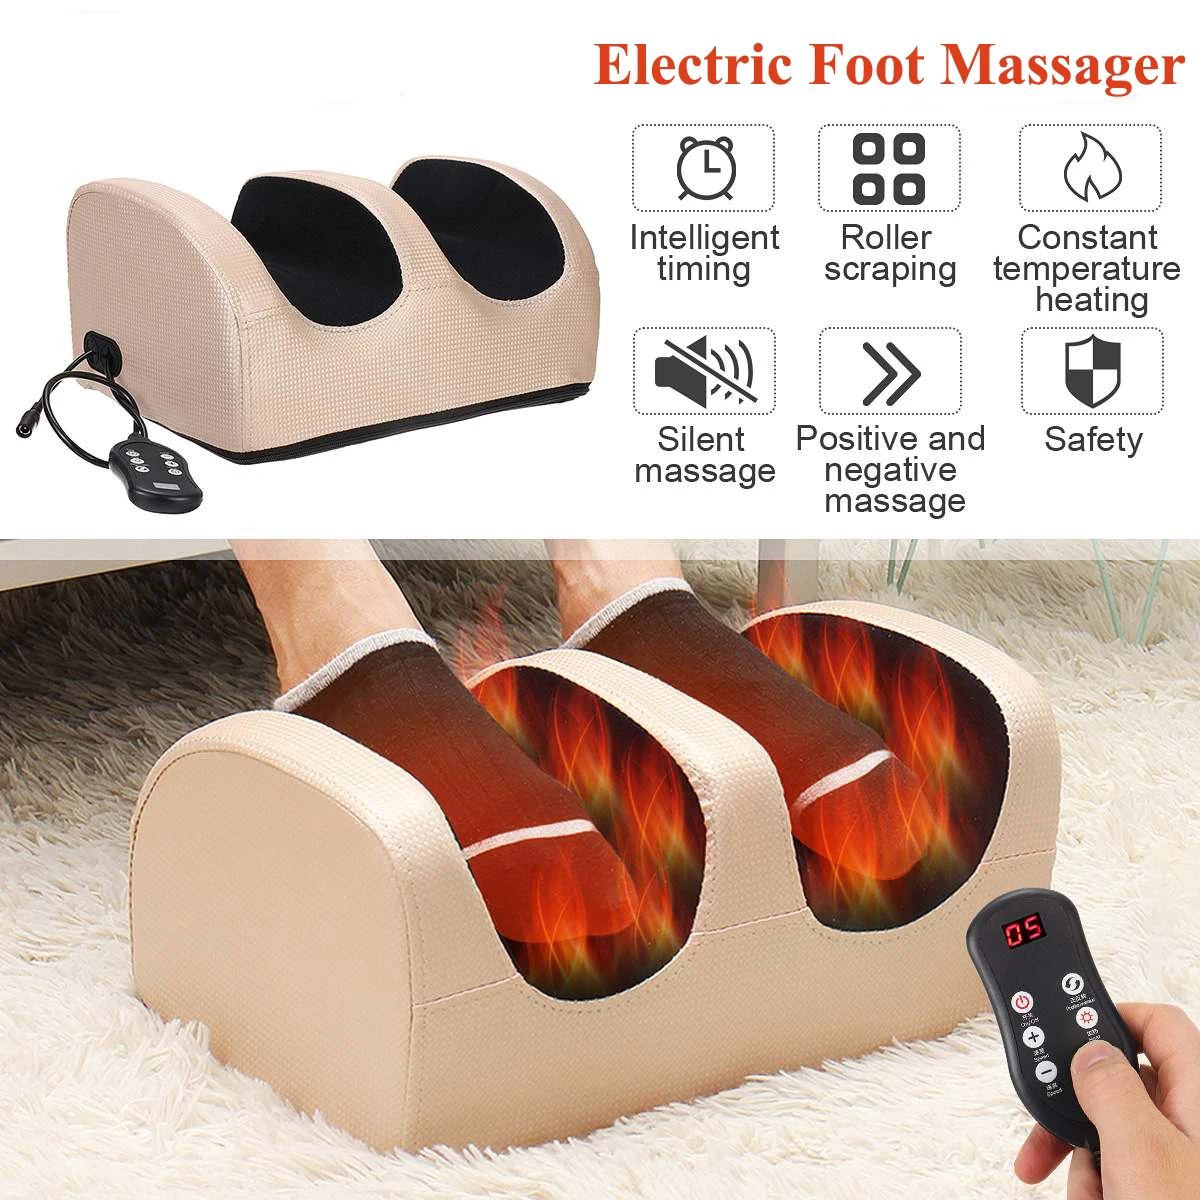 Electric Foot Massager Heating Therapy Hot Compression Shiatsu Kneading Roller Muscle Relaxation Pain Relief Foot Spa Machine images - 6